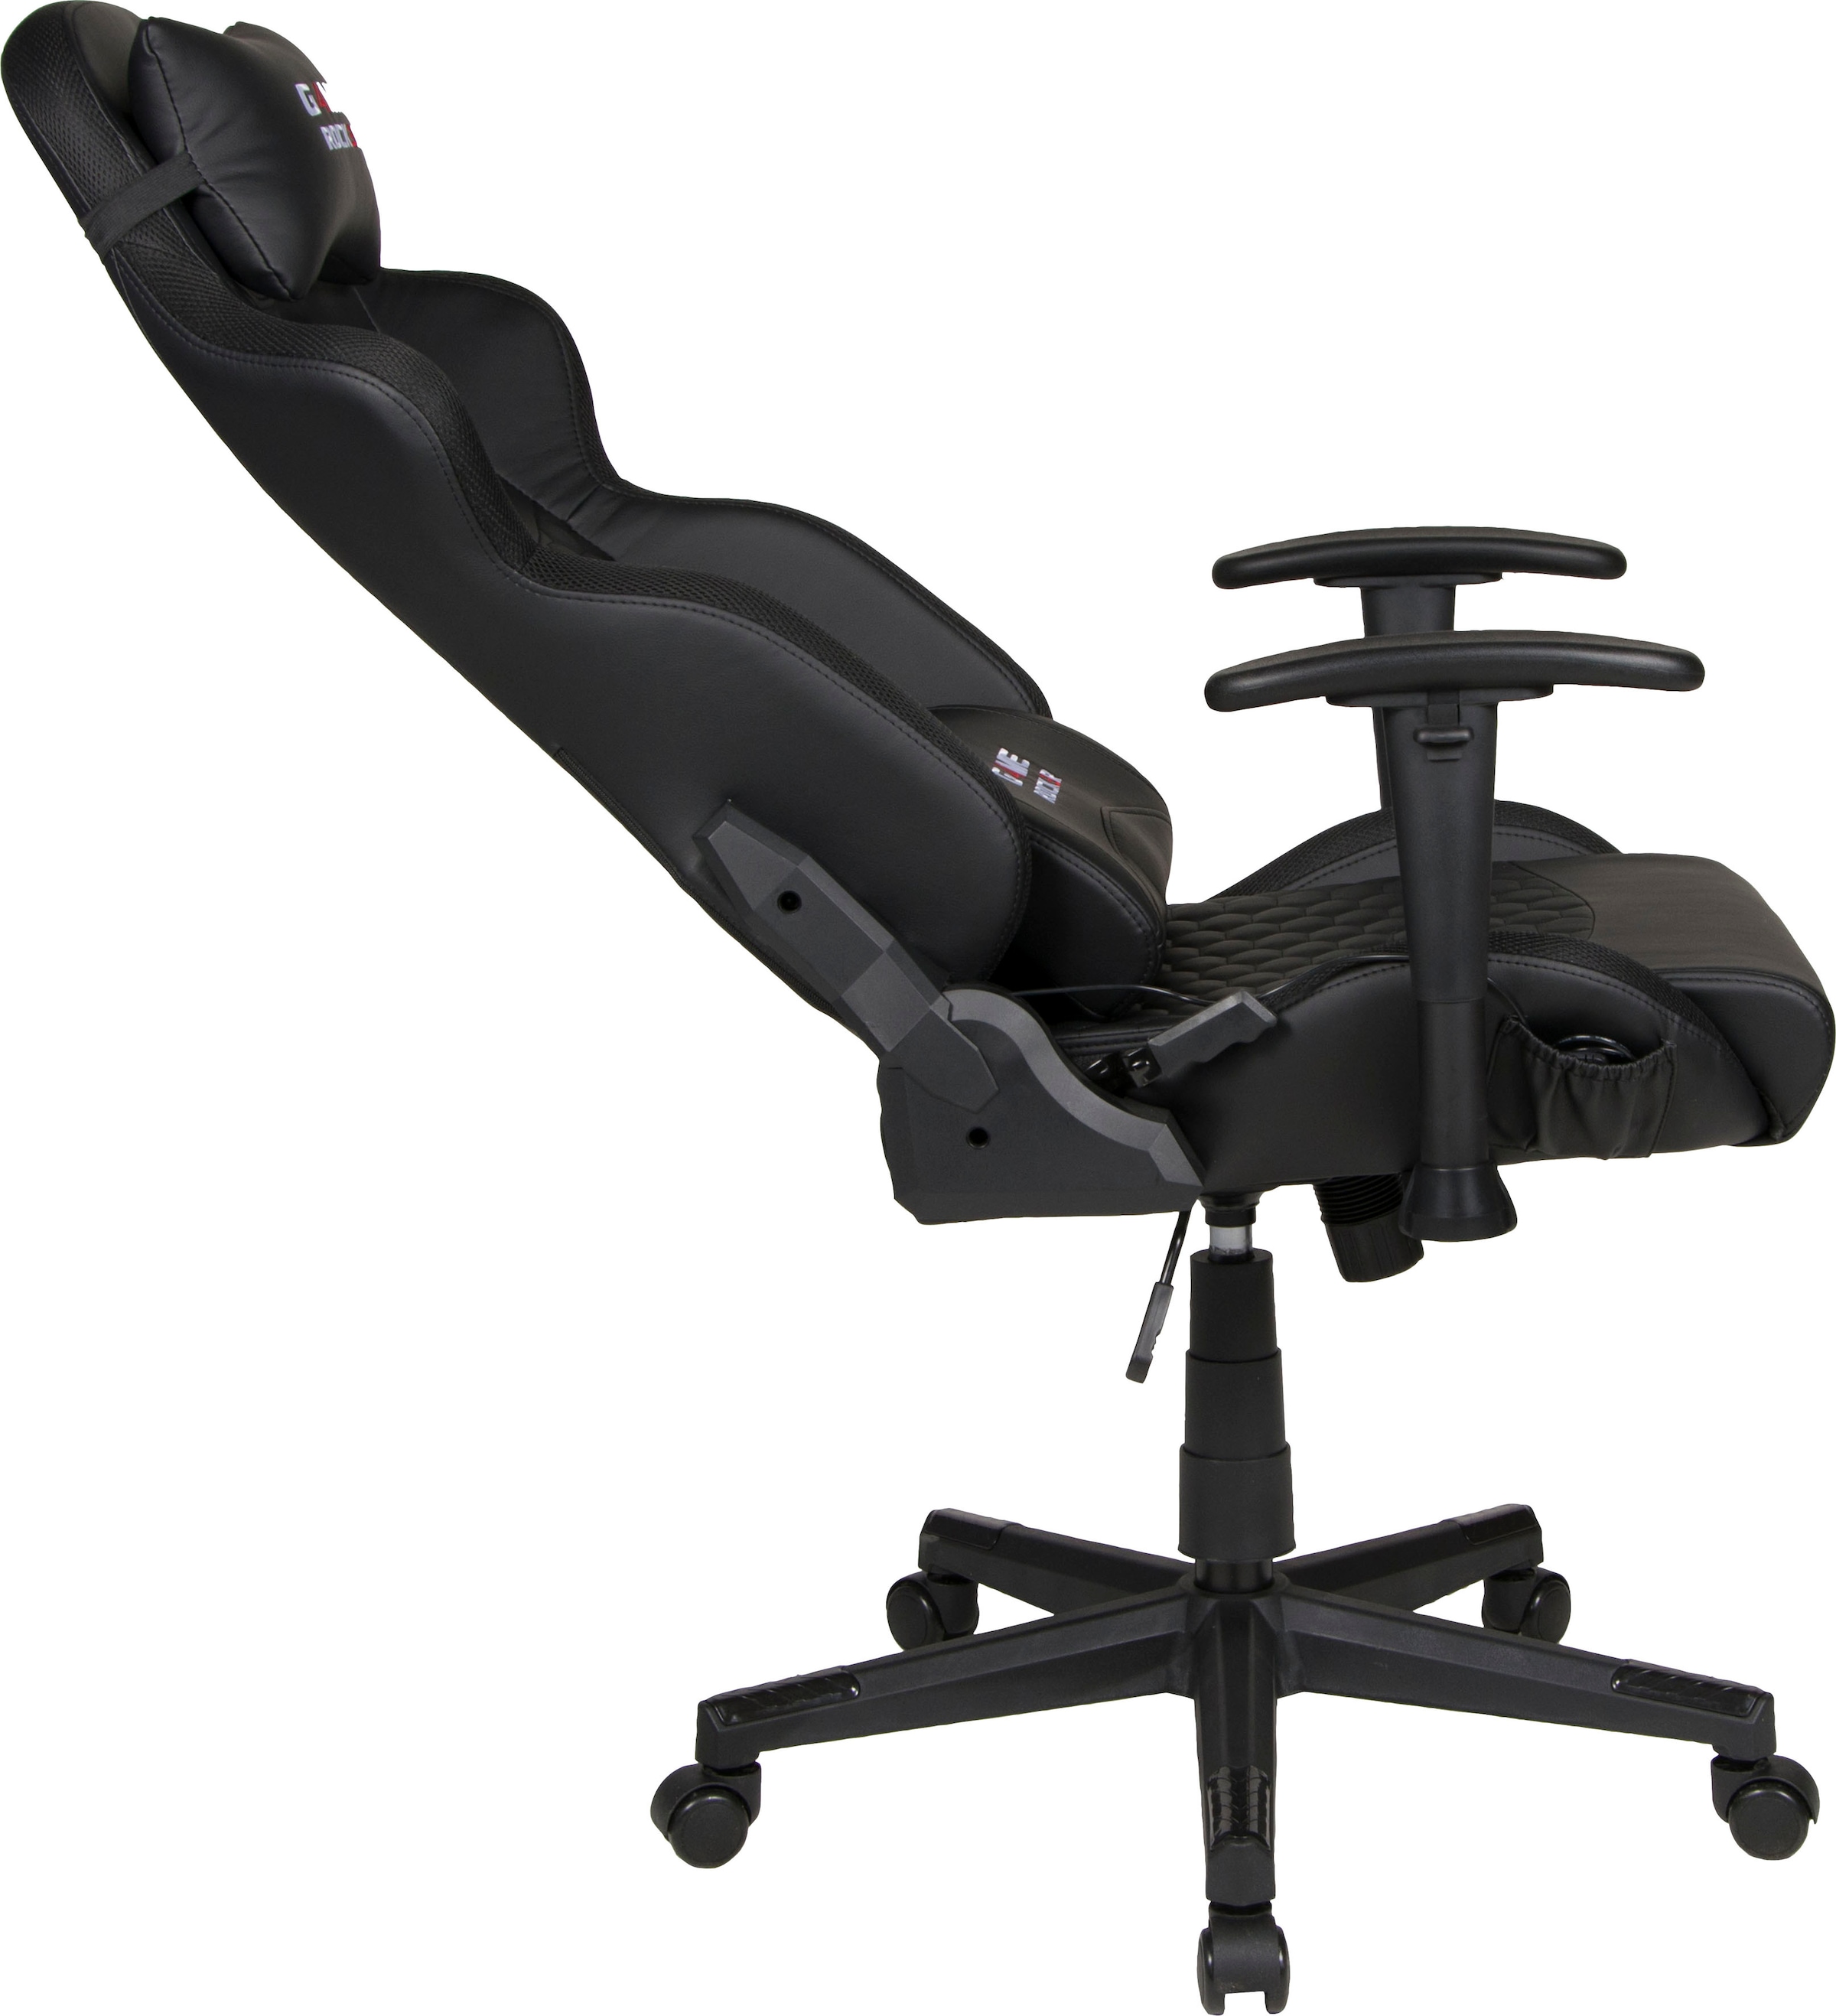 Duo Collection Chefsessel »Game-Rocker G-10 LED«, Kunstleder-Netzstoff, Gaming Chair mit LED Wechselbeleuchtung